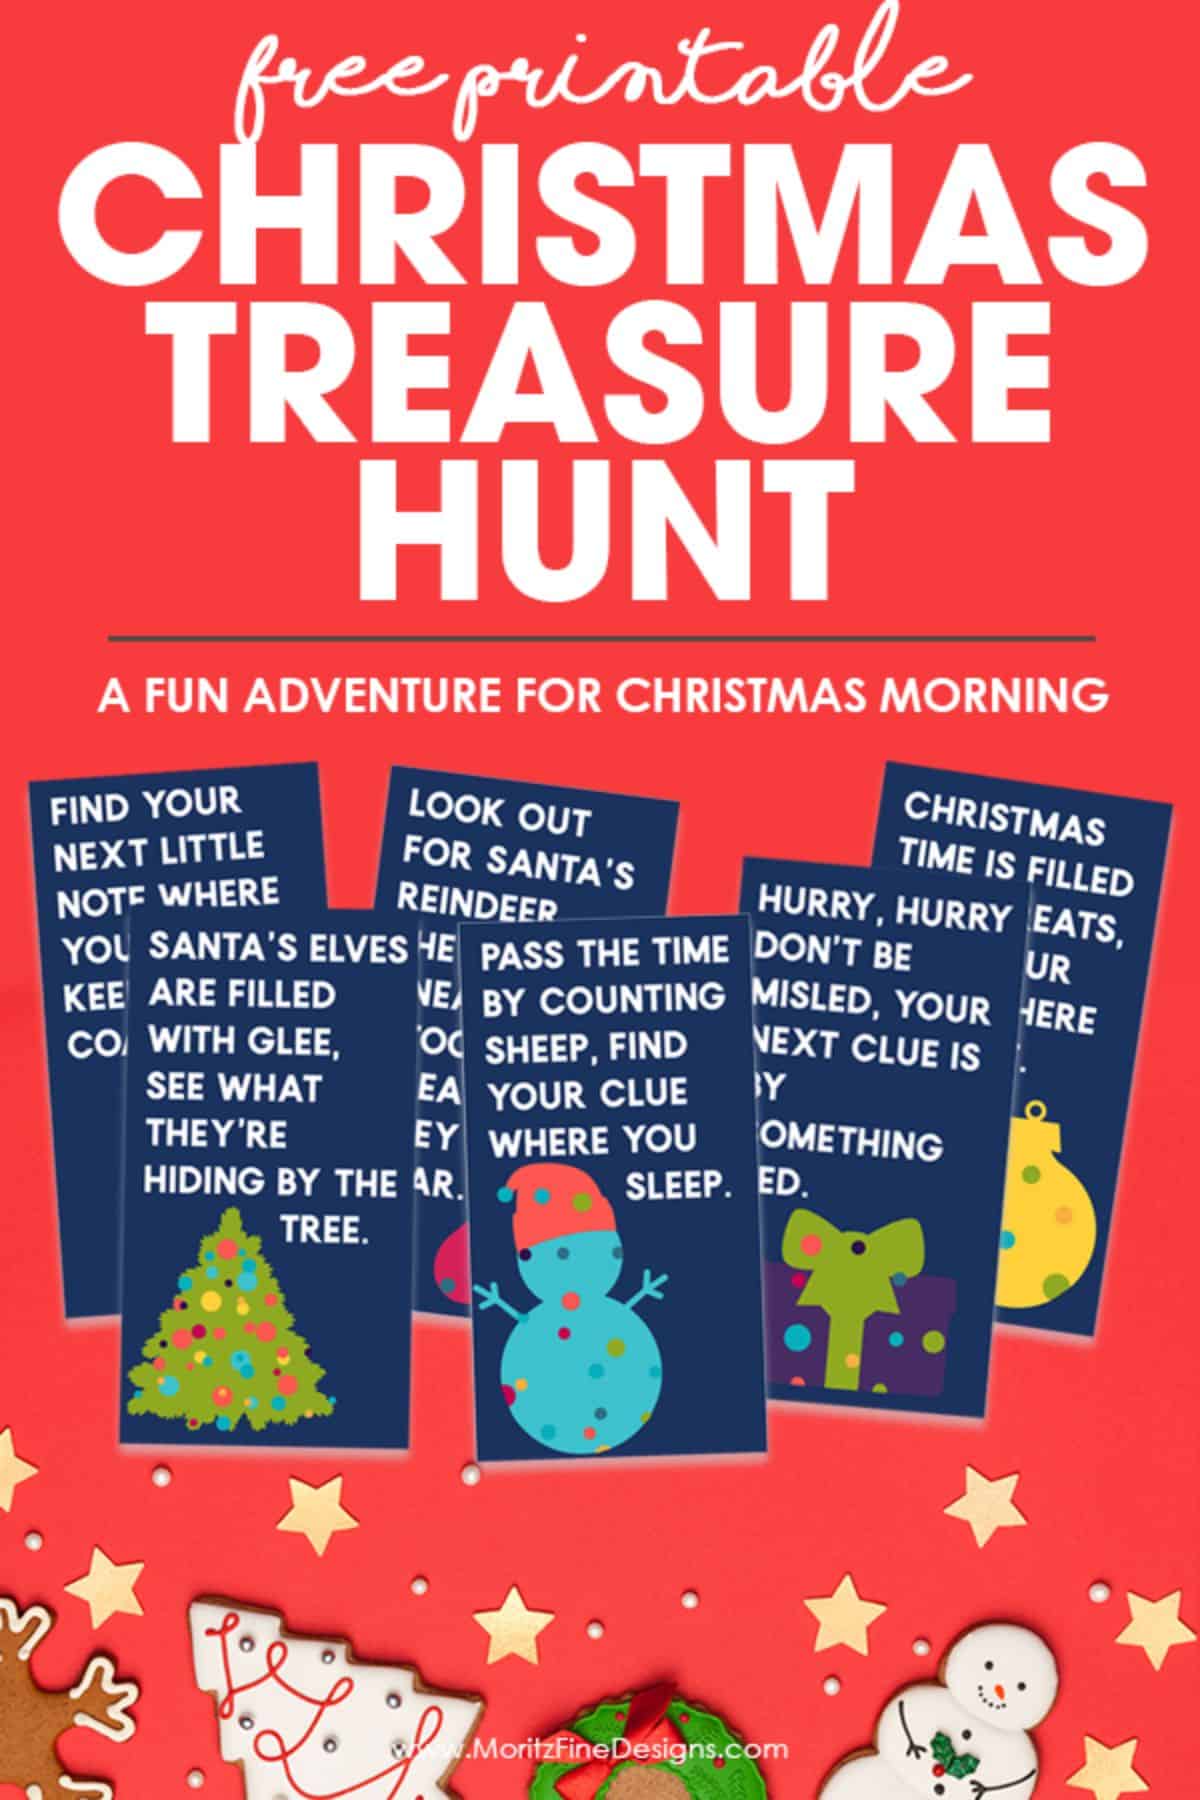 Christmas treasure hunt poster with bunch of clue cards.